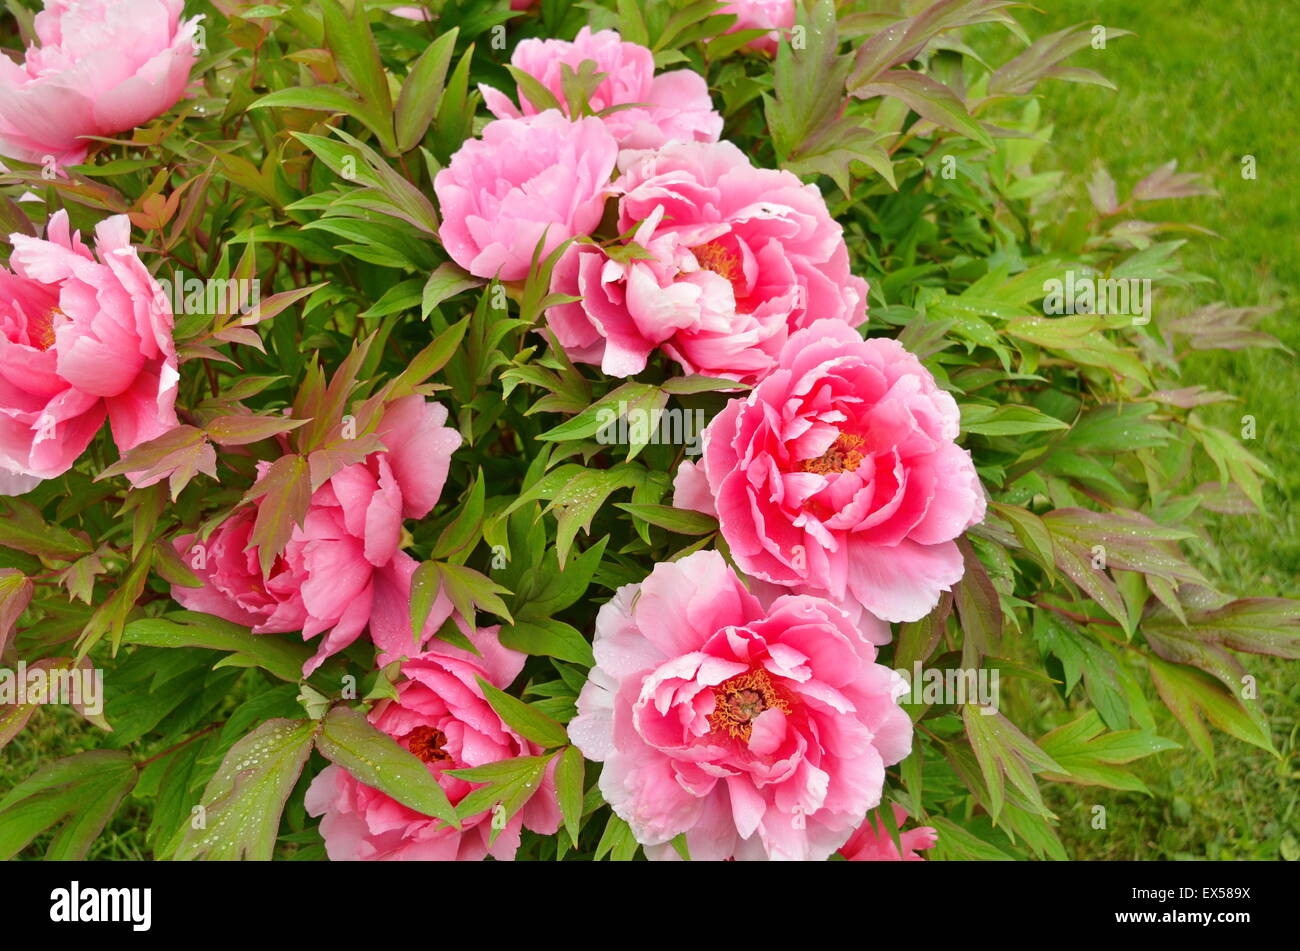 Peonies flowers in a green garden outdoors Stock Photo